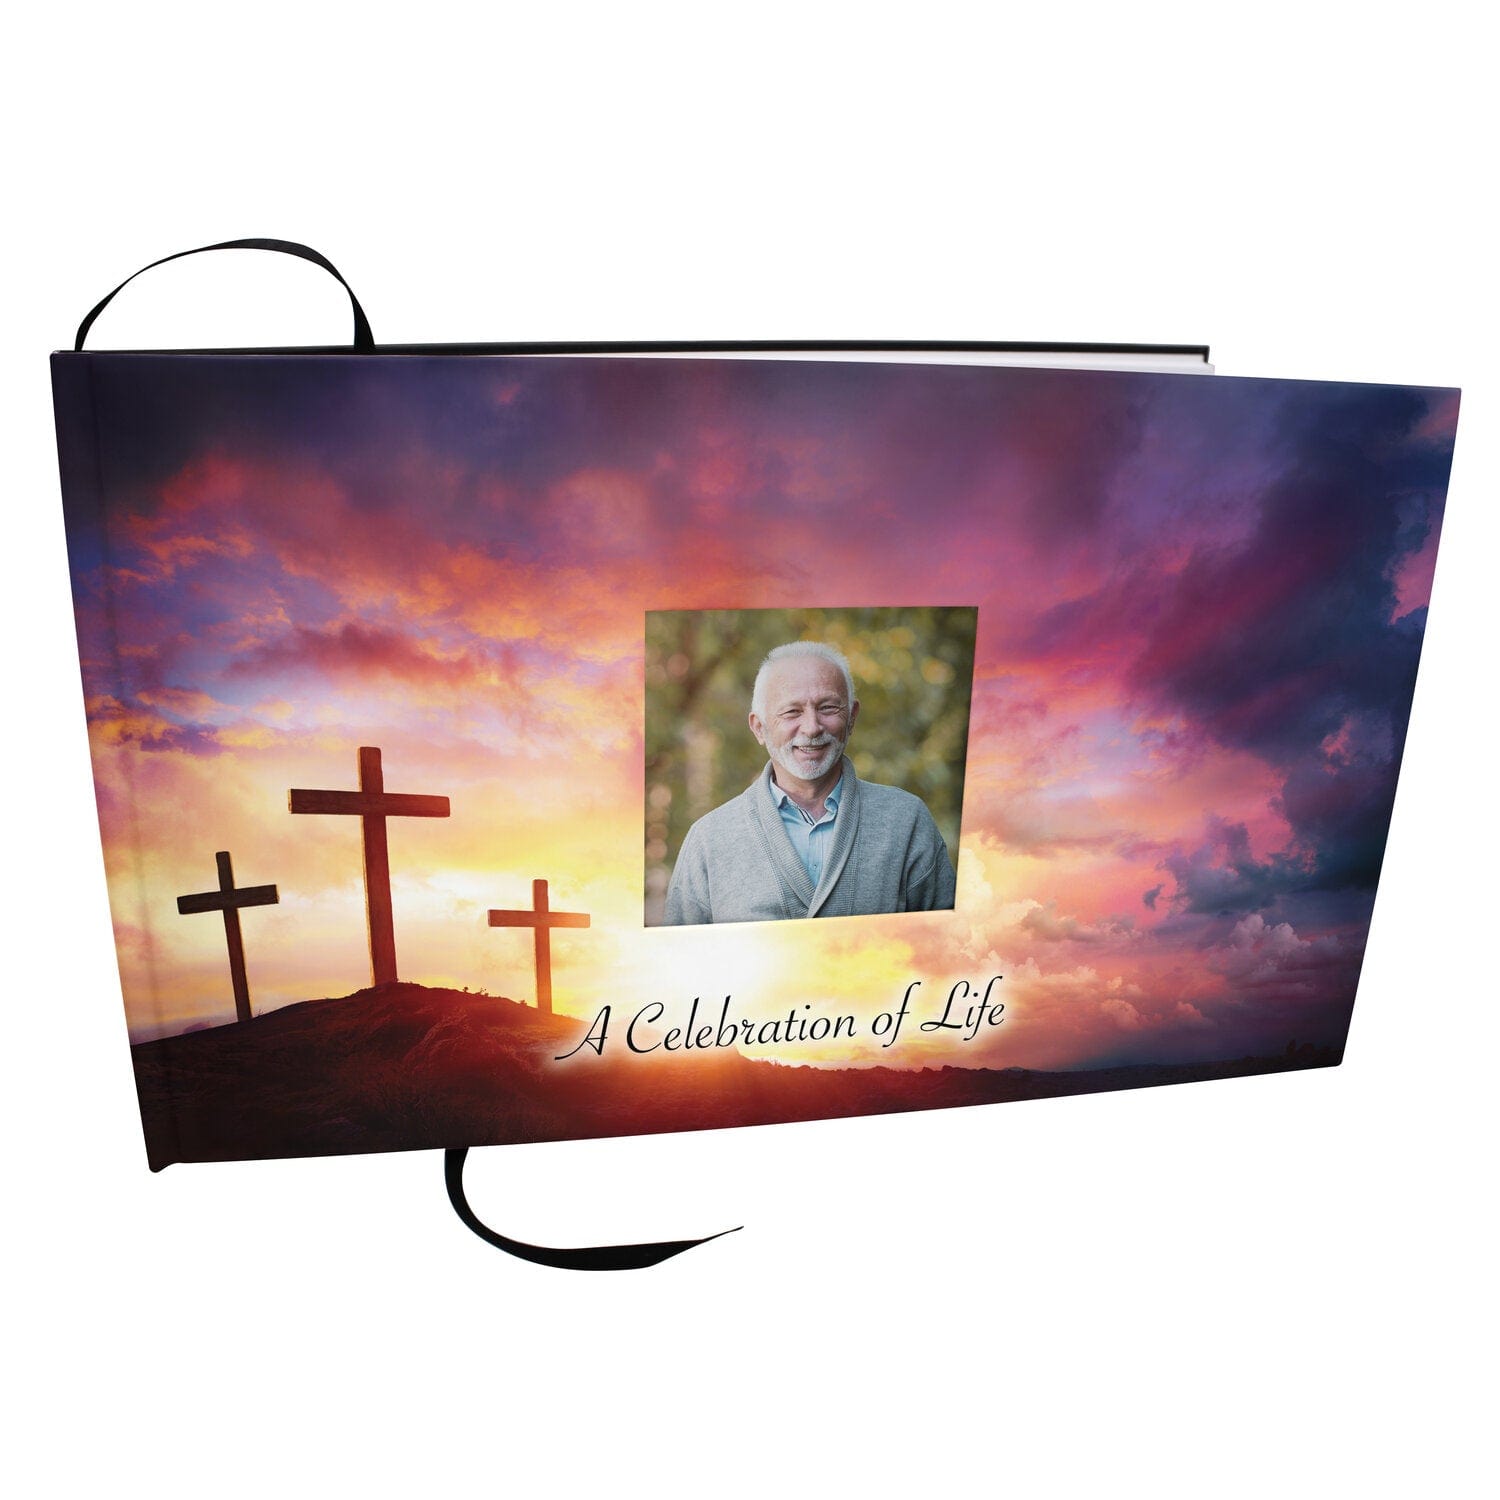 Commemorative Cremation Urns Three Crosses Matching Themed 'Celebration of Life' Guest Book for Funeral or Memorial Service